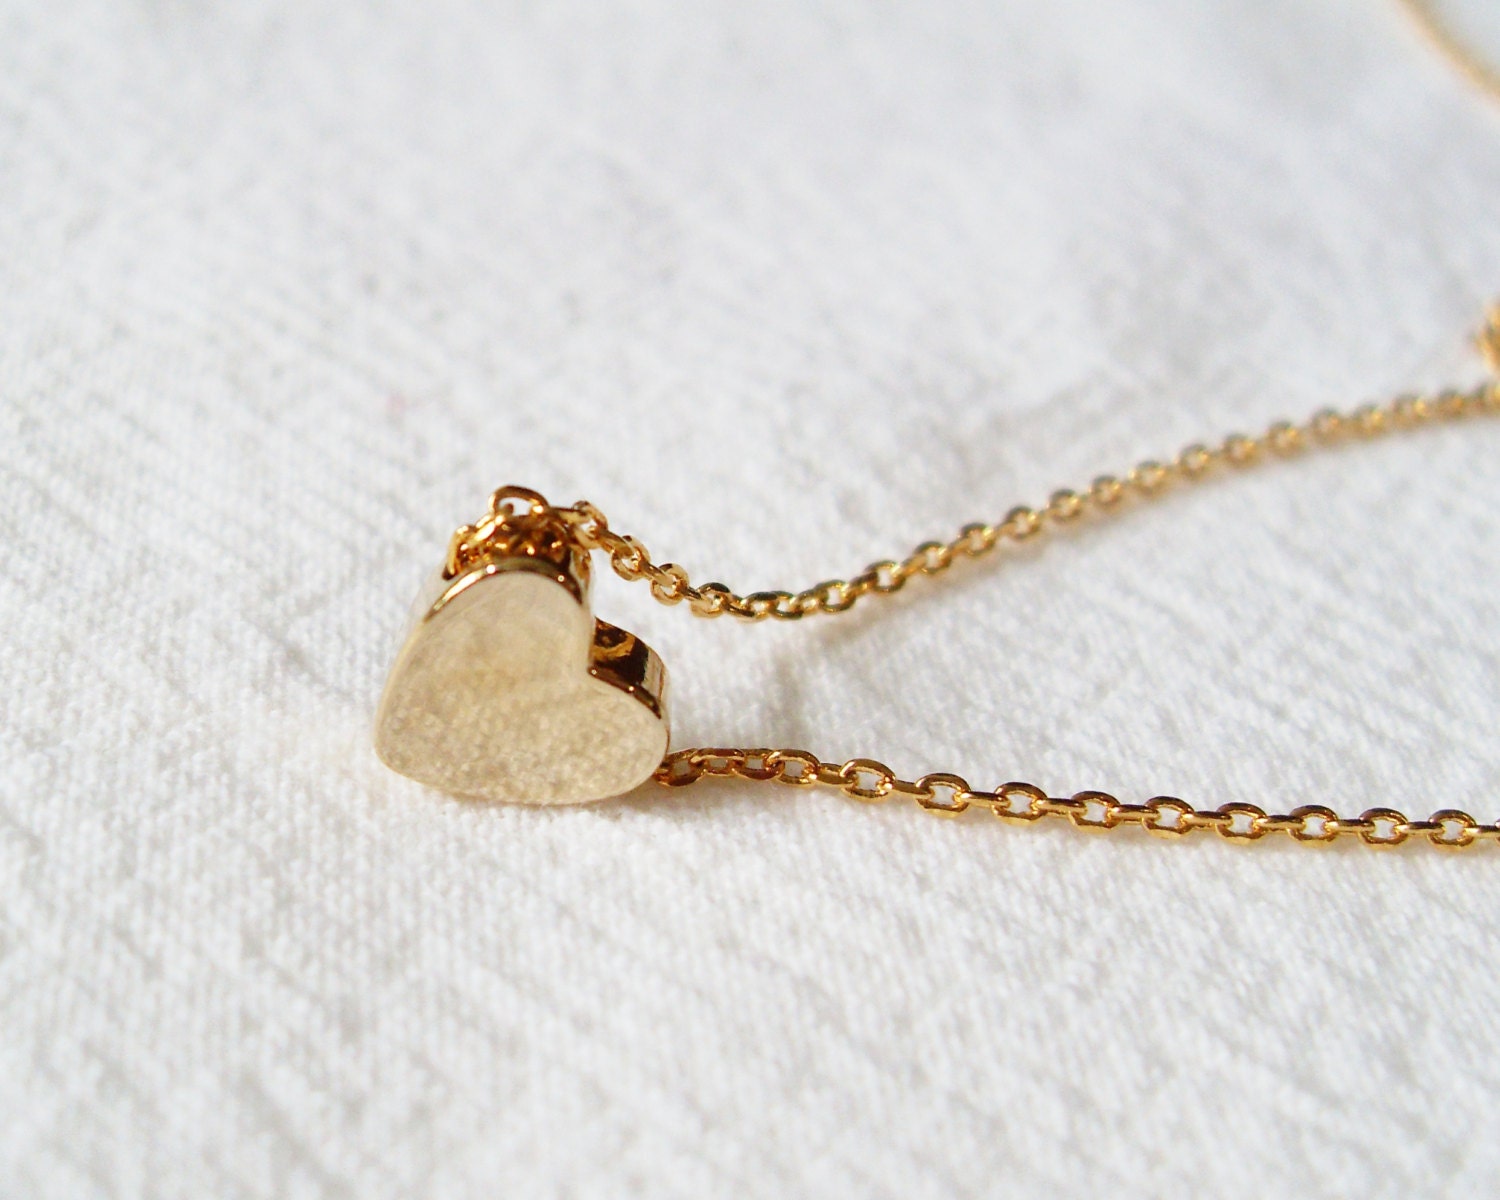 Dainty Heart Necklace. A 14K Gold Plated Chain by PlanetPicnic